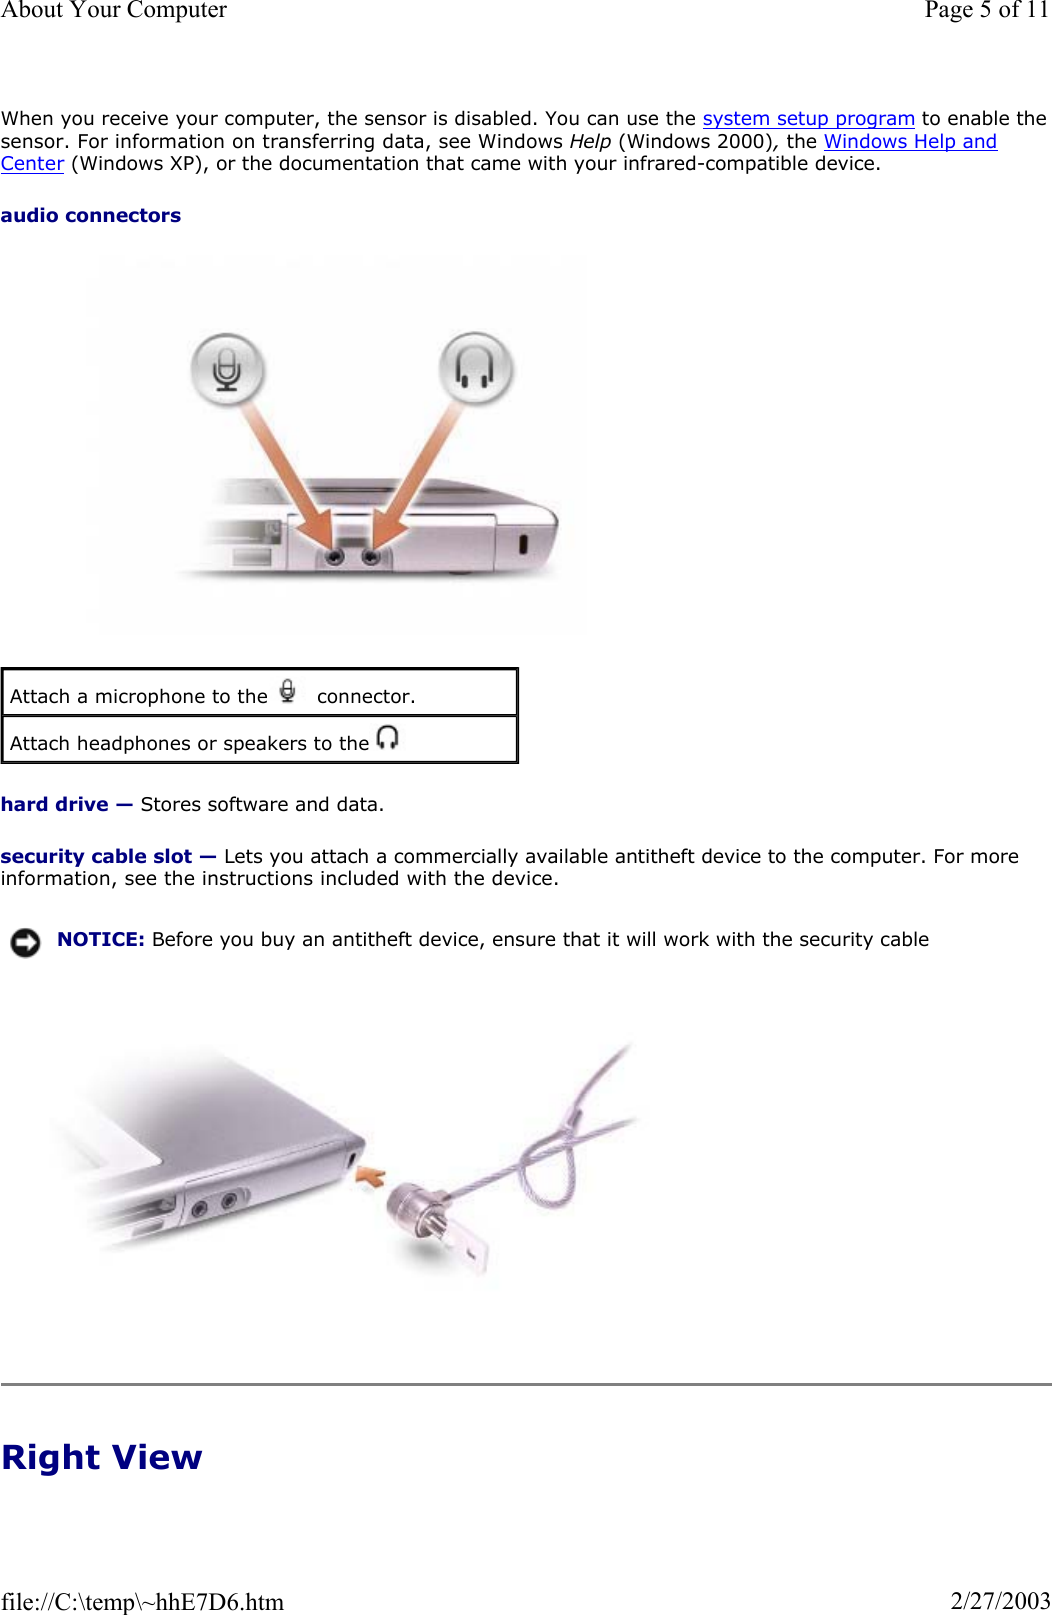 When you receive your computer, the sensor is disabled. You can use the system setup program to enable thesensor. For information on transferring data, see Windows Help (Windows 2000), the Windows Help and Center (Windows XP), or the documentation that came with your infrared-compatible device. audio connectorshard drive — Stores software and data. security cable slot — Lets you attach a commercially available antitheft device to the computer. For more information, see the instructions included with the device. Right View Attach a microphone to the   connector. Attach headphones or speakers to the   NOTICE: Before you buy an antitheft device, ensure that it will work with the security cable Page 5 of 11About Your Computer2/27/2003file://C:\temp\~hhE7D6.htm